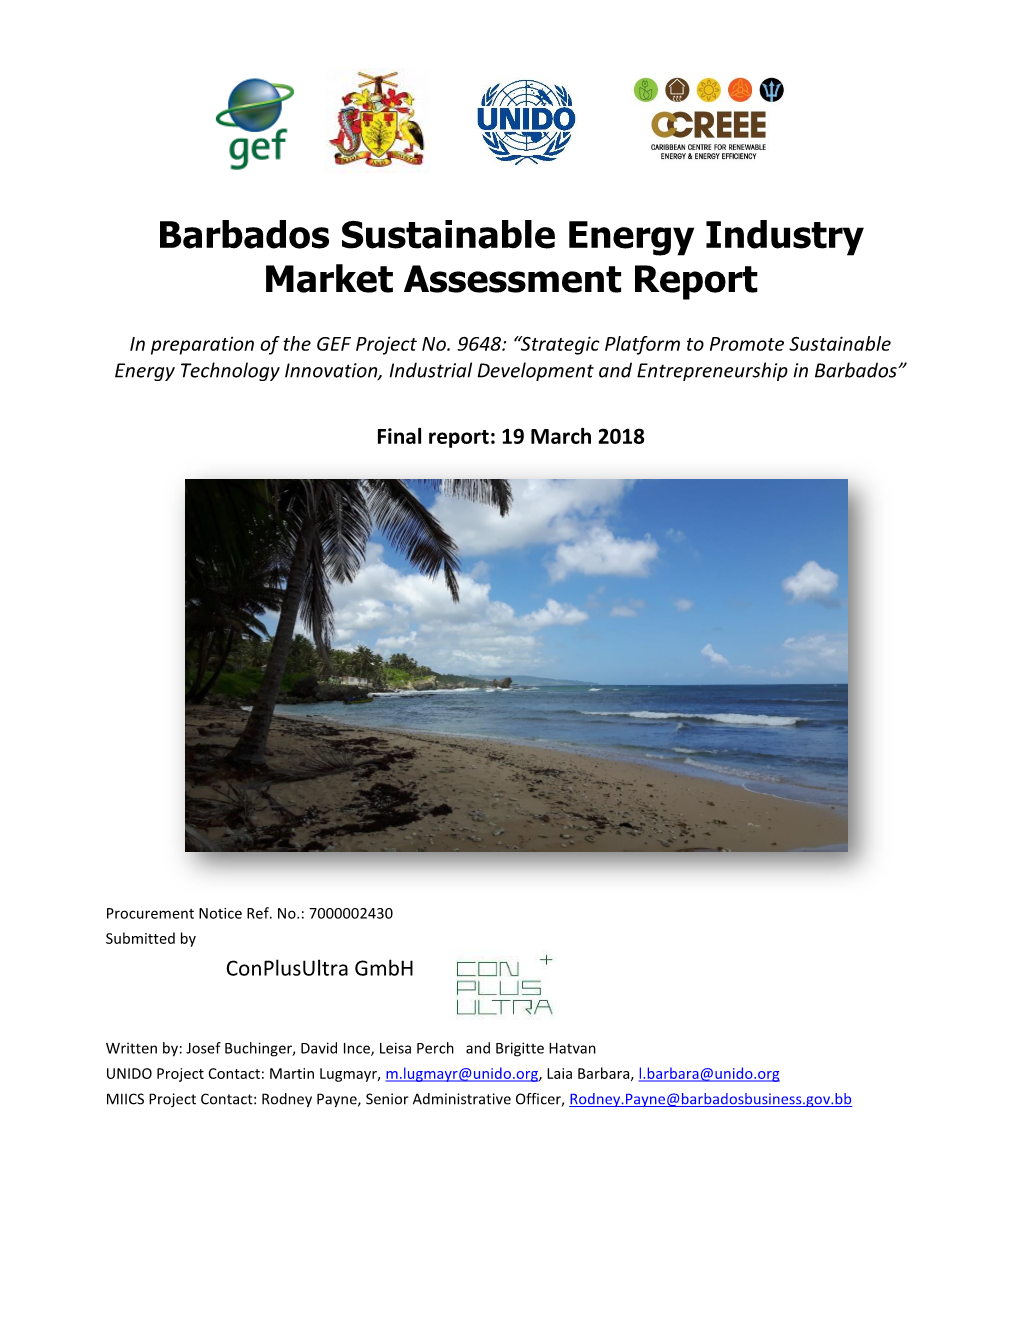 Barbados Sustainable Energy Industry Market Assessment Report